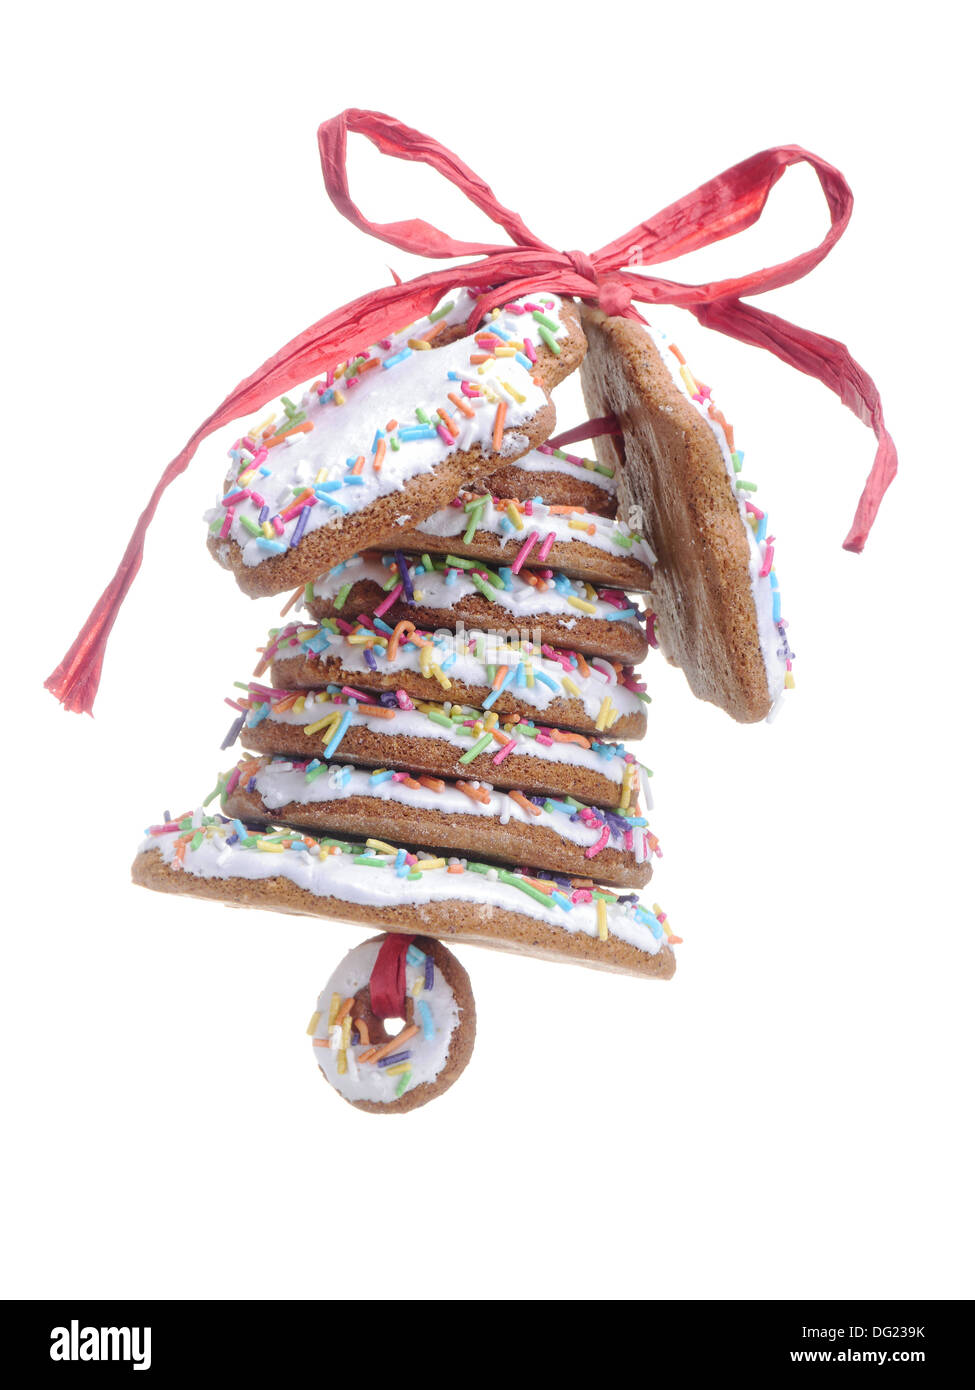 Christmas bell assembled from gingerbread shaped cookies and tied with red ribbon shot over white blue background Stock Photo